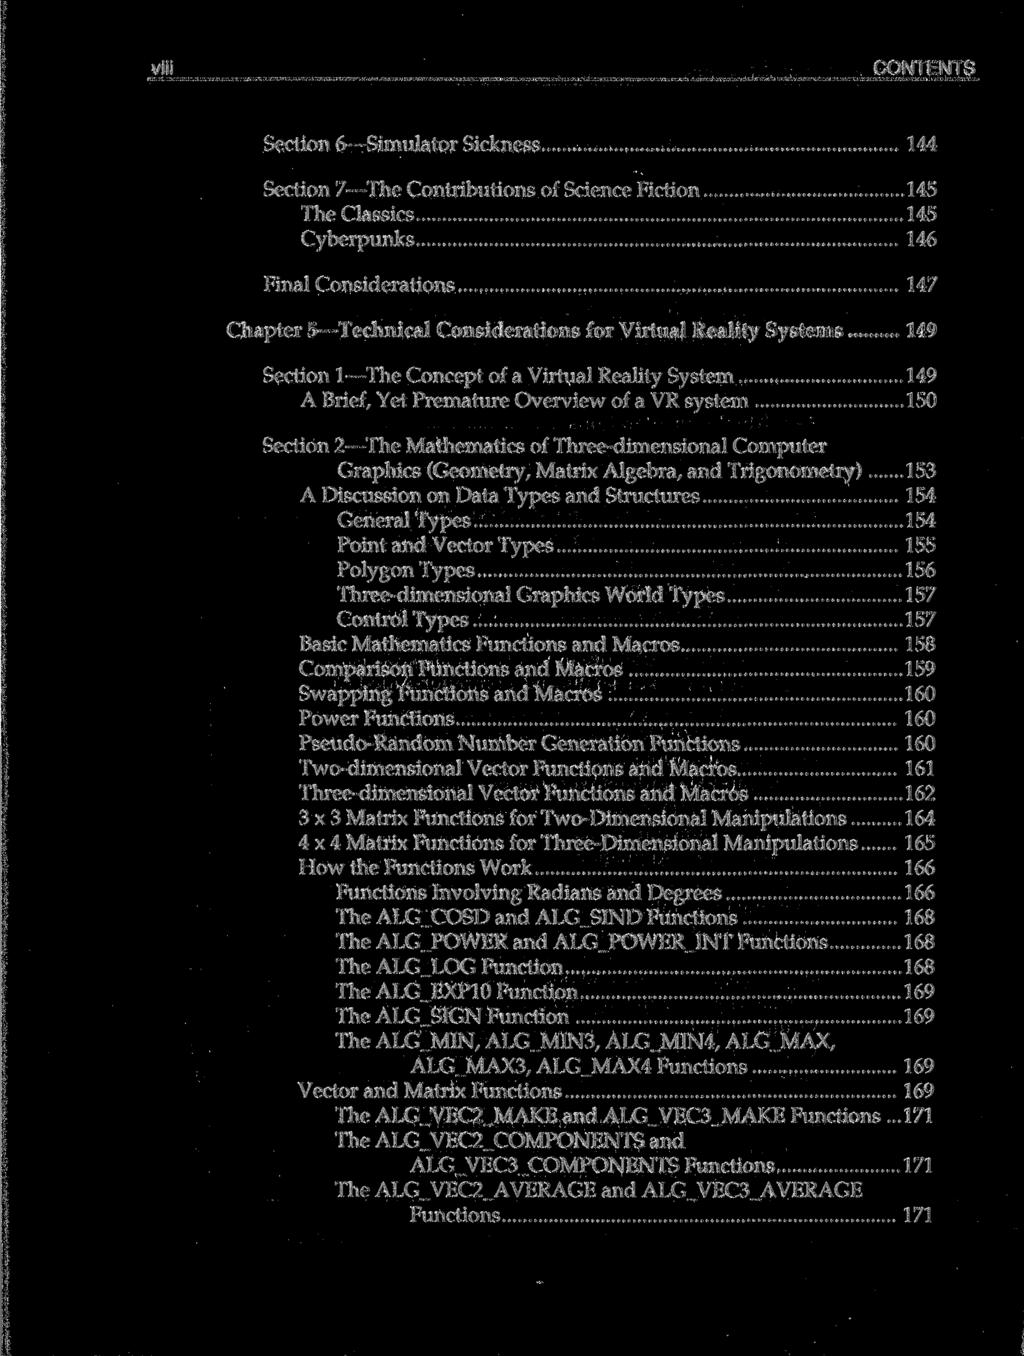 VIM CONTENTS Section 6 Simulator Sickness 144 Section 7 The Contributions of Science Fiction 145 The Classics 145 Cyberpunks 146 Final Considerations 147 Chapter 5 Technical Considerations for